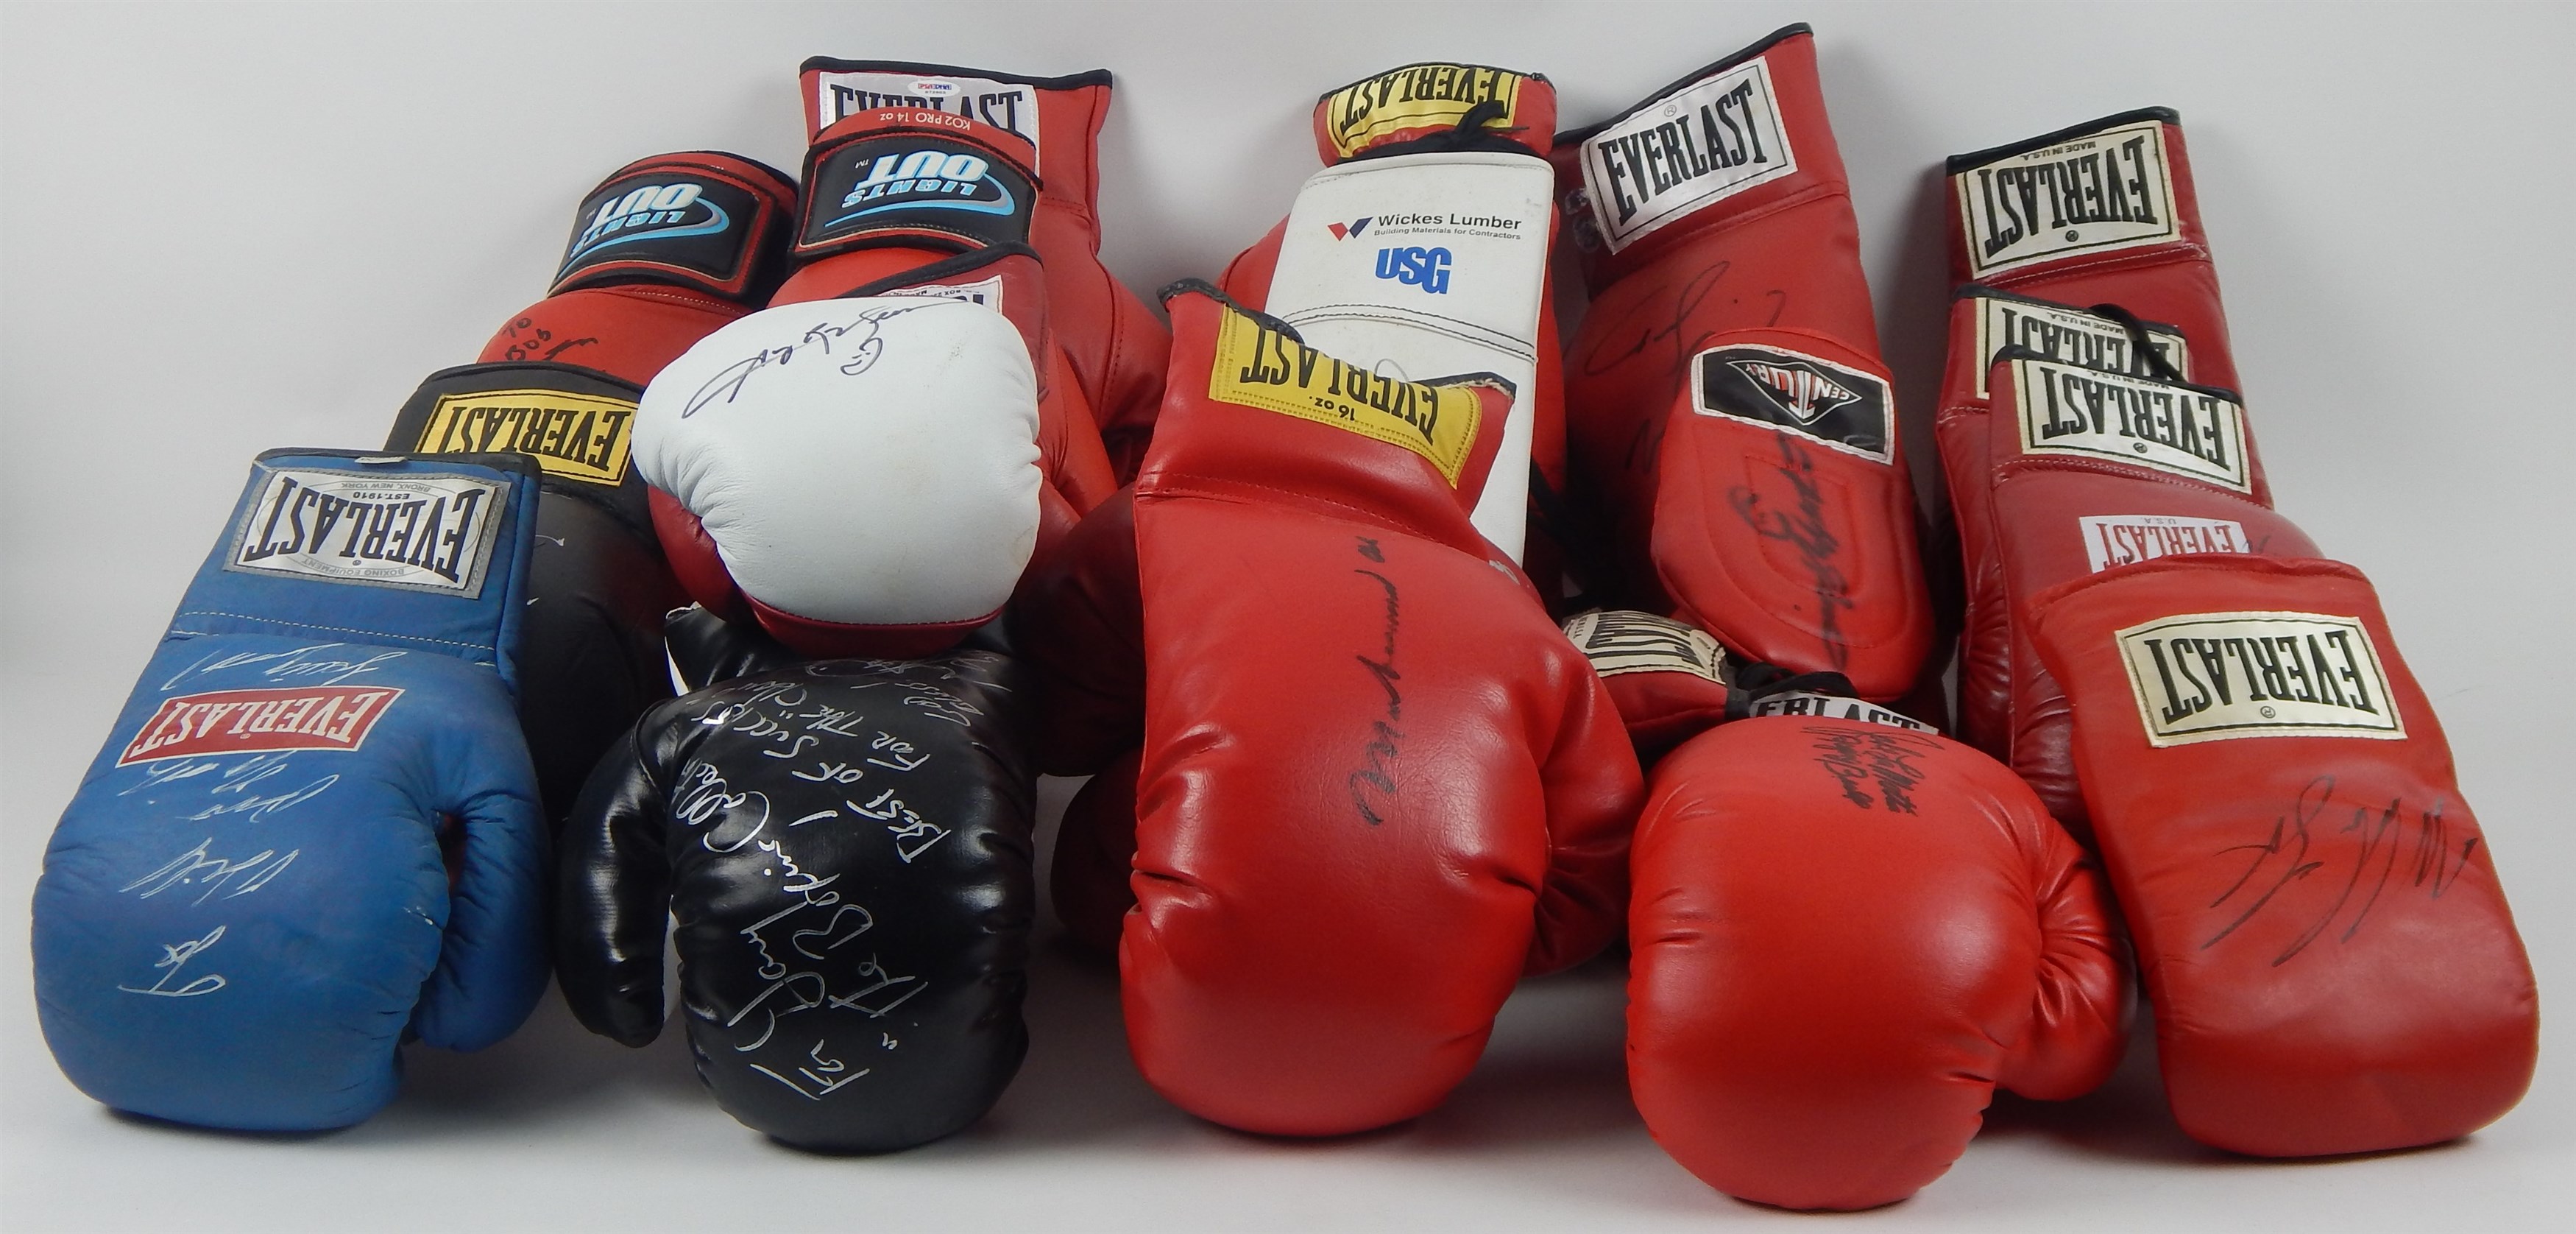 Muhammad Ali & Boxing - Signed Boxing Glove Collection w/ Muhammad Ali (21)